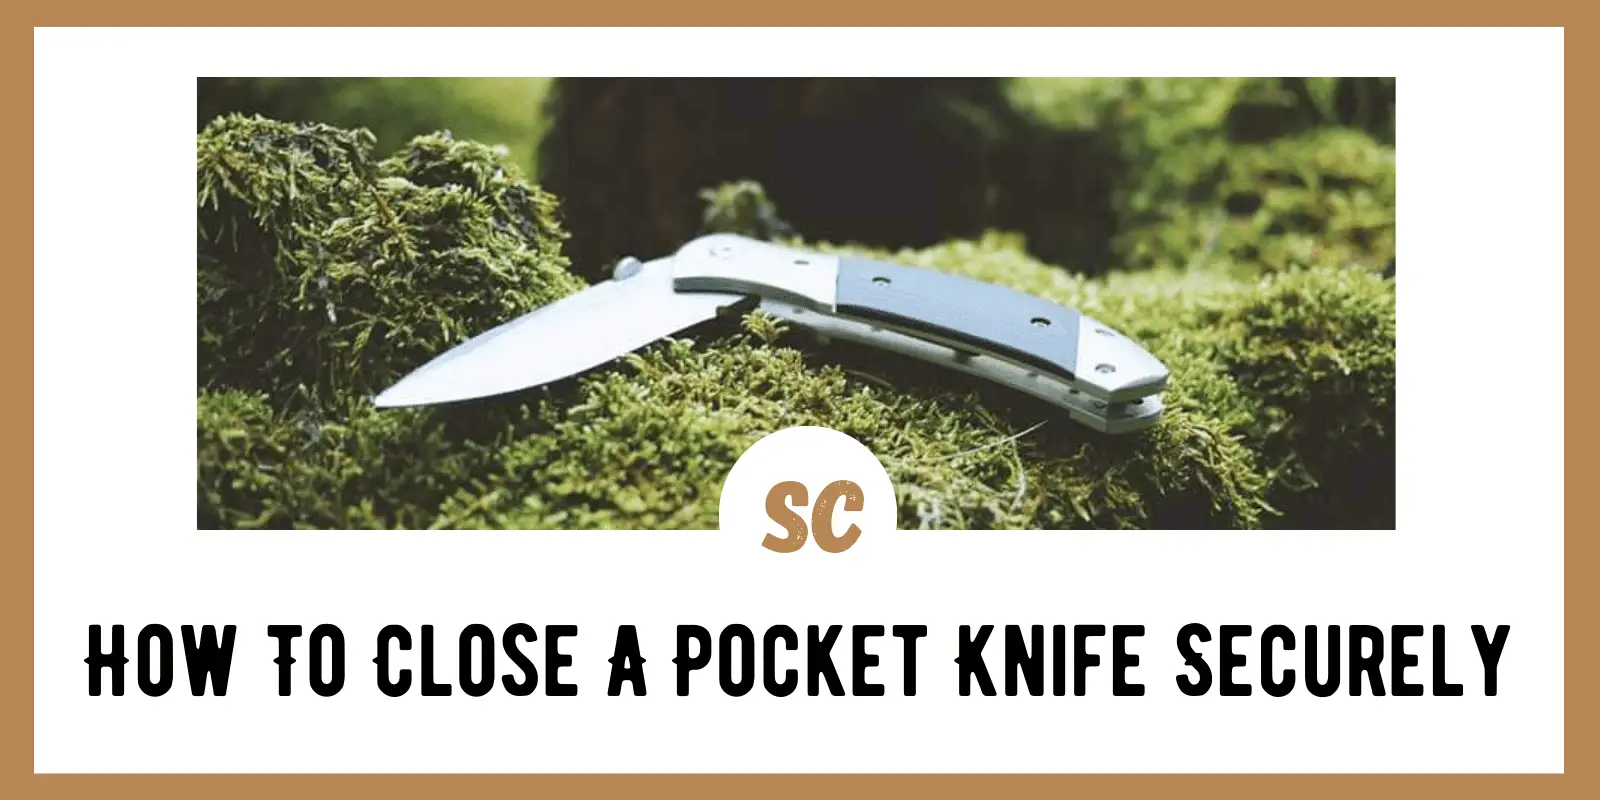 How To Close A Pocket Knife Securely